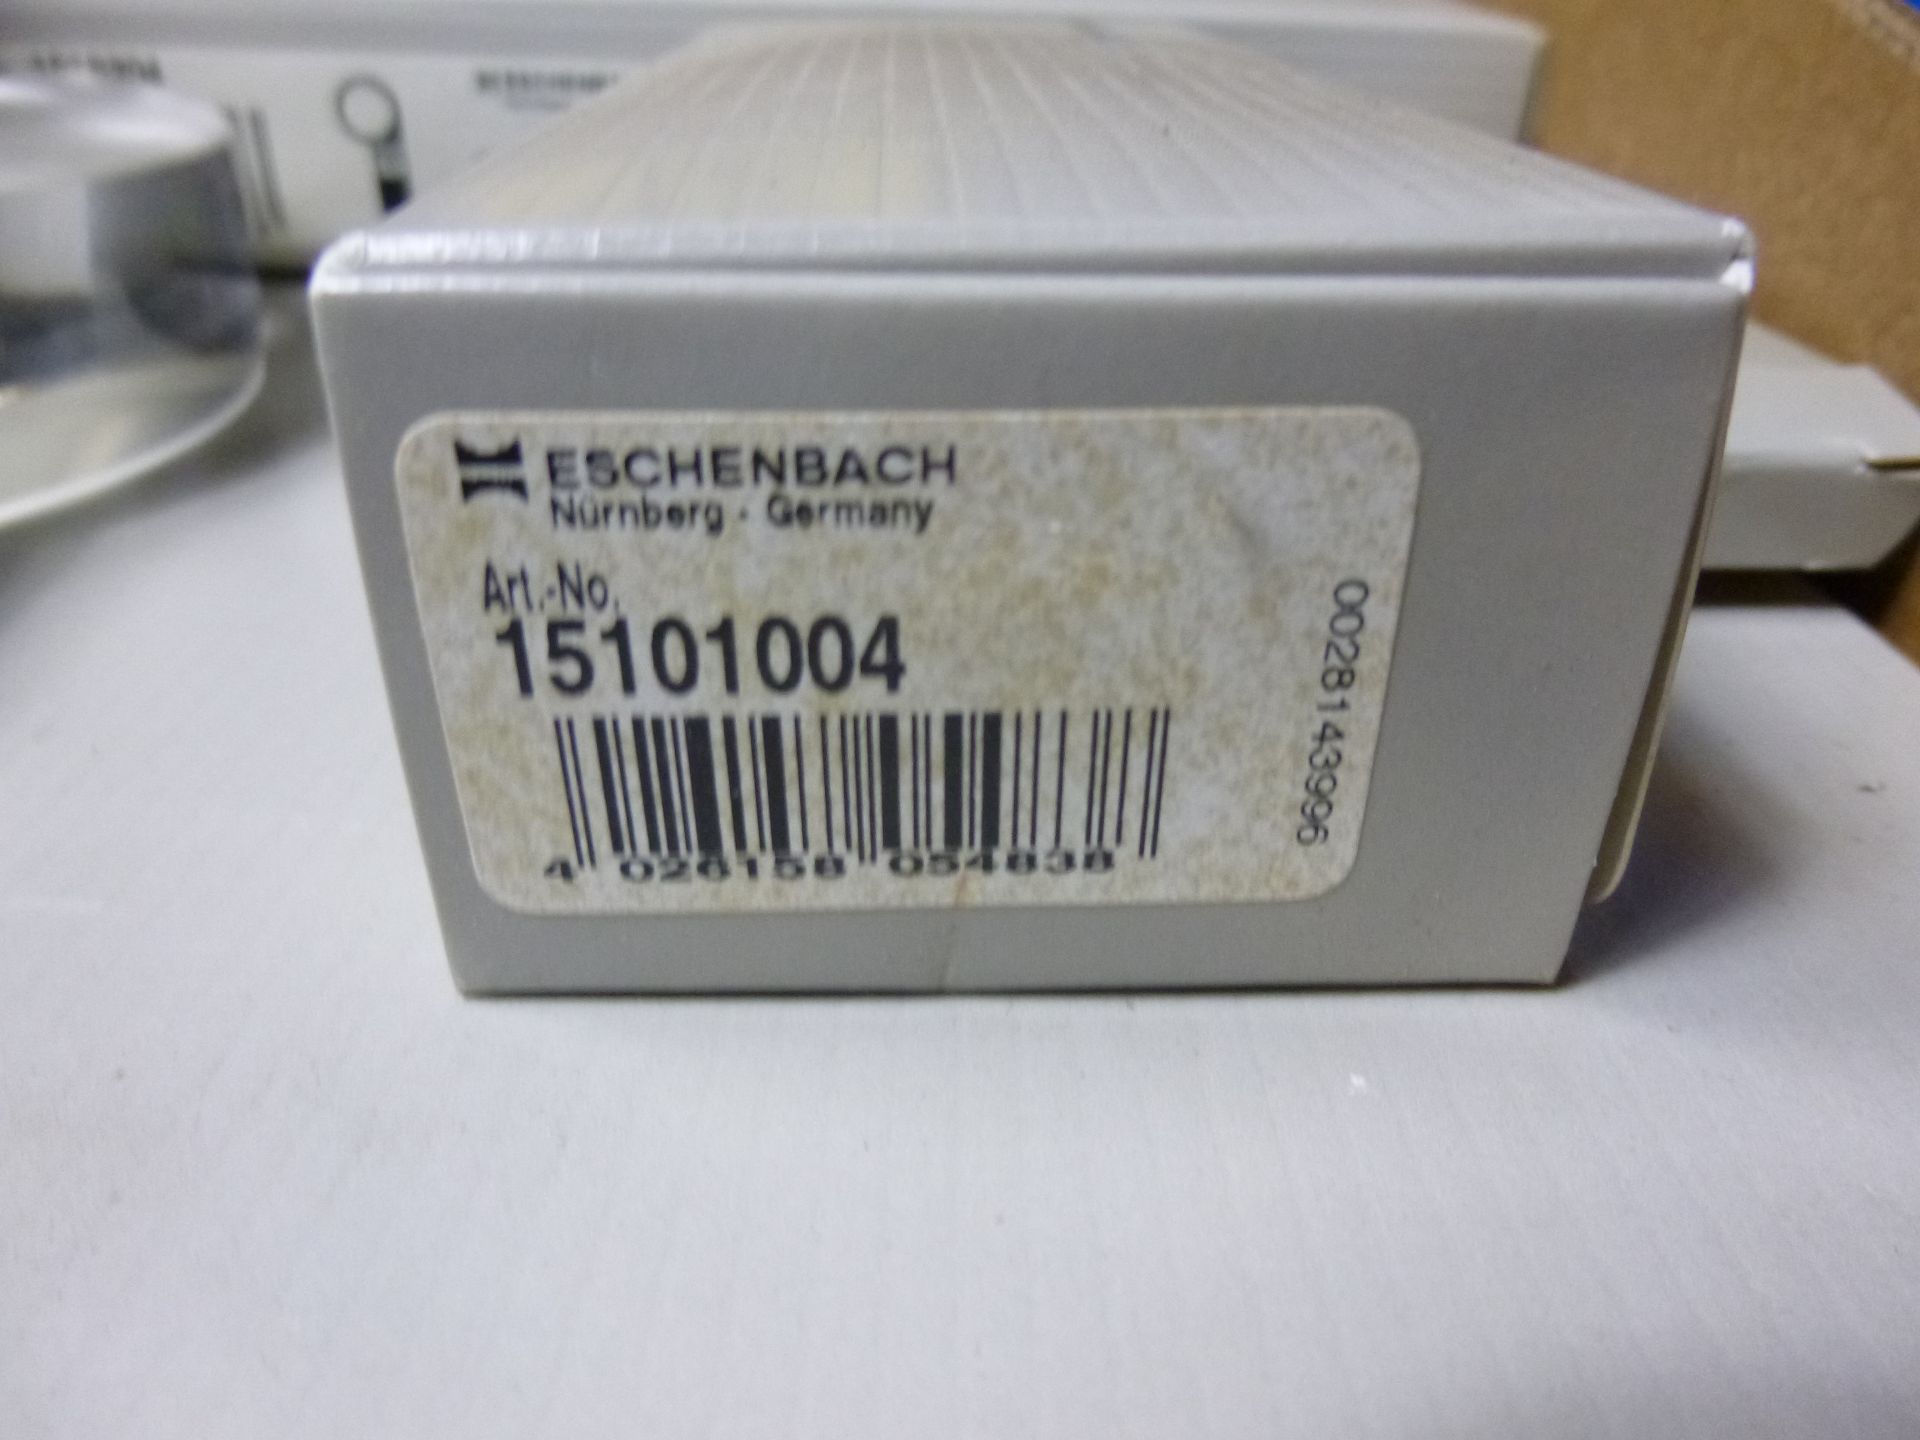 Lot of new Eschenbach optica loops magnifying glasses etc (new in boxes) Shipping can be prepared - Image 4 of 9